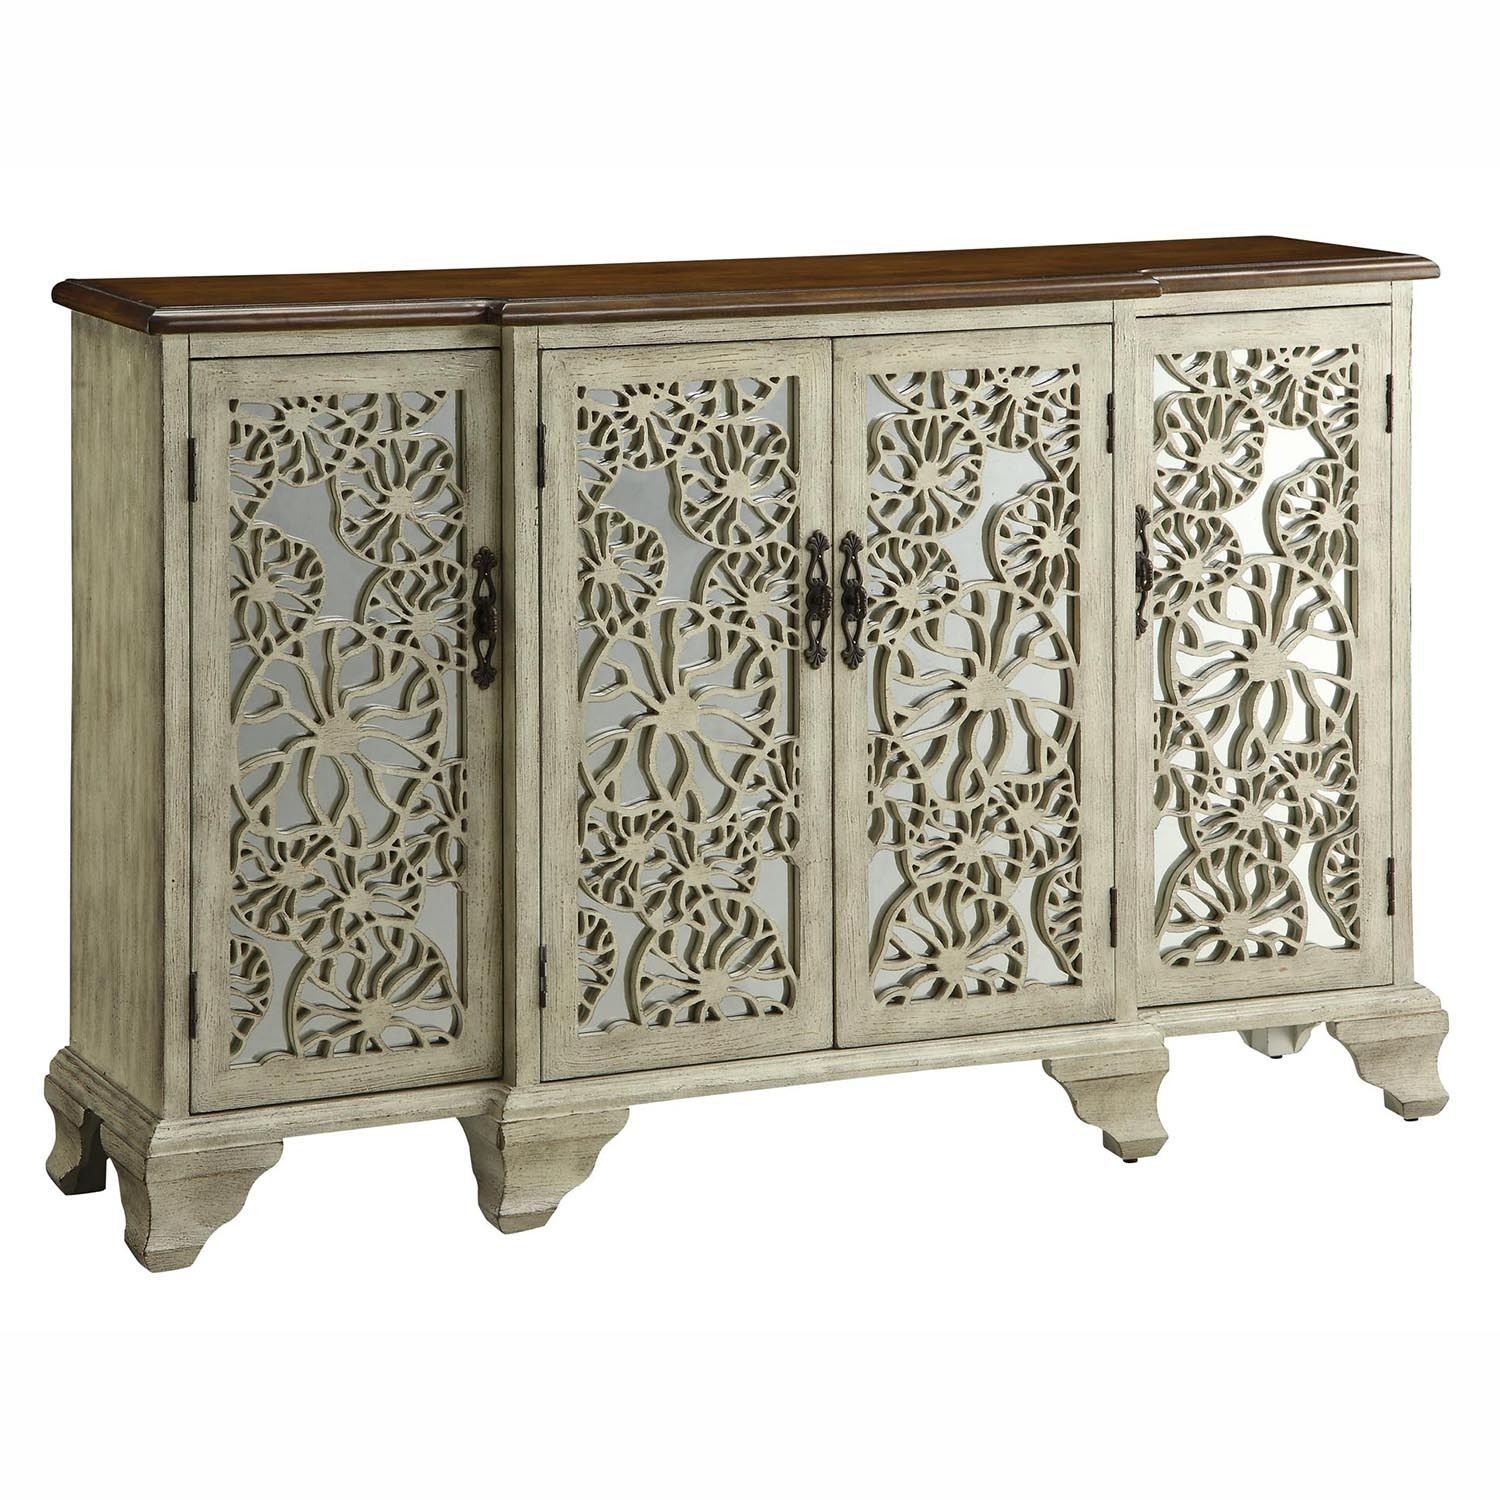 Gorgeous Antique White Wood 4 Mirrored Doors Sideboard Buffet In Aged Mirrored 4 Door Sideboards (View 3 of 30)